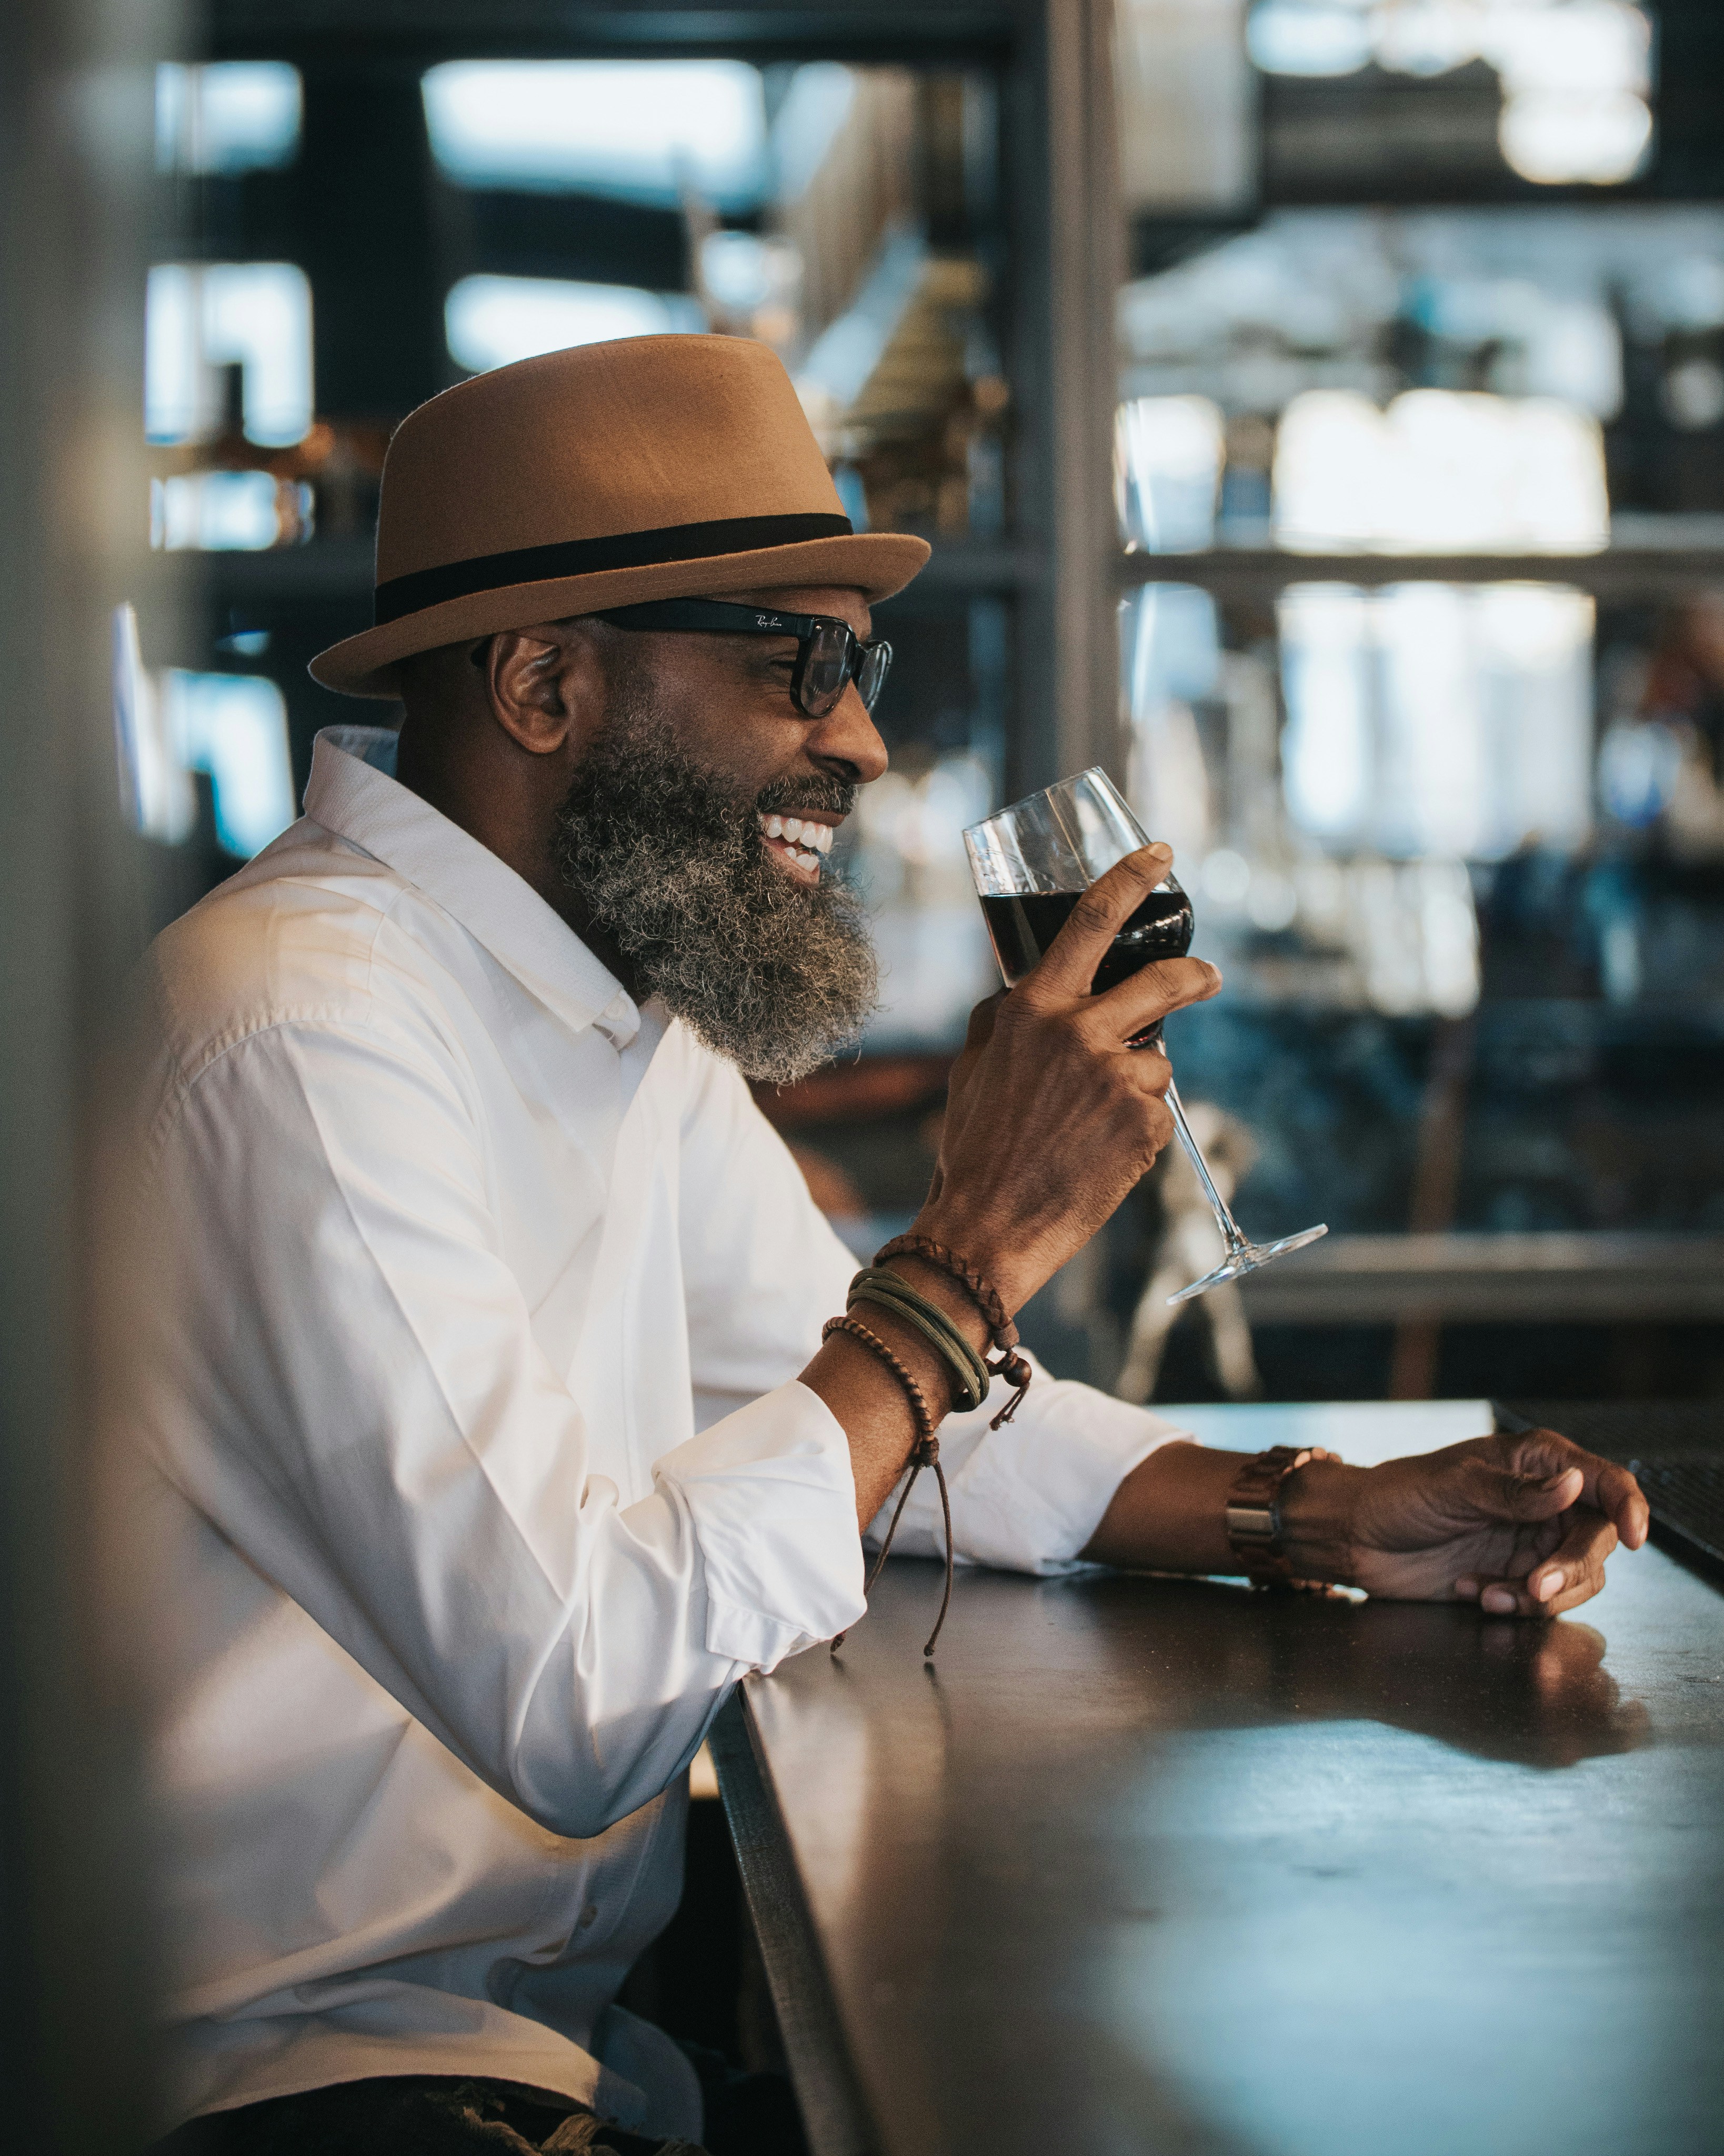 great photo recipe,how to photograph man in white dress shirt and brown hat holding clear drinking glass